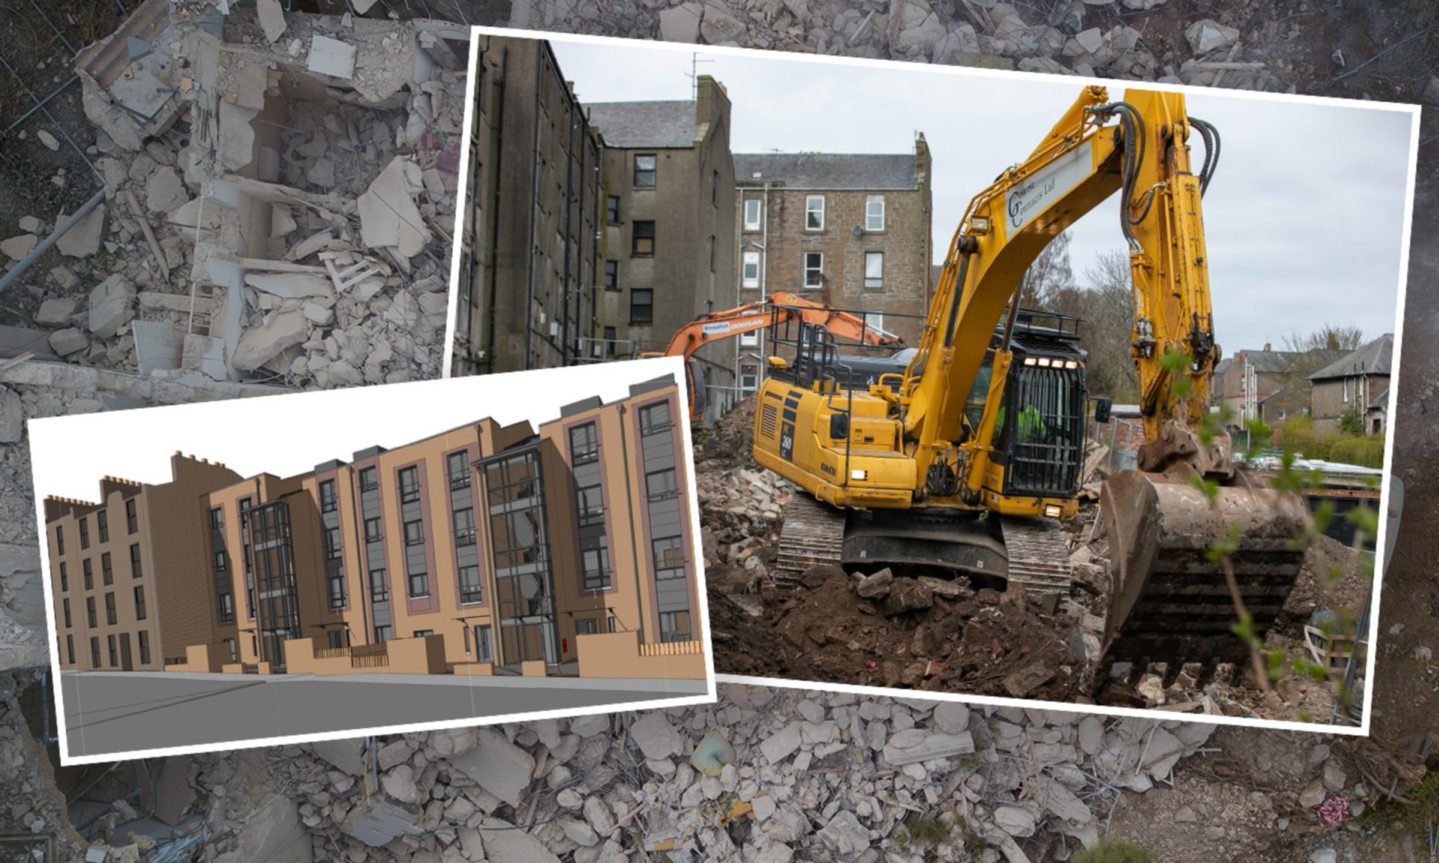 The flats on Blackness Road were controversially demolished three years ago. Image: DC Thomson/Dundee City Council.